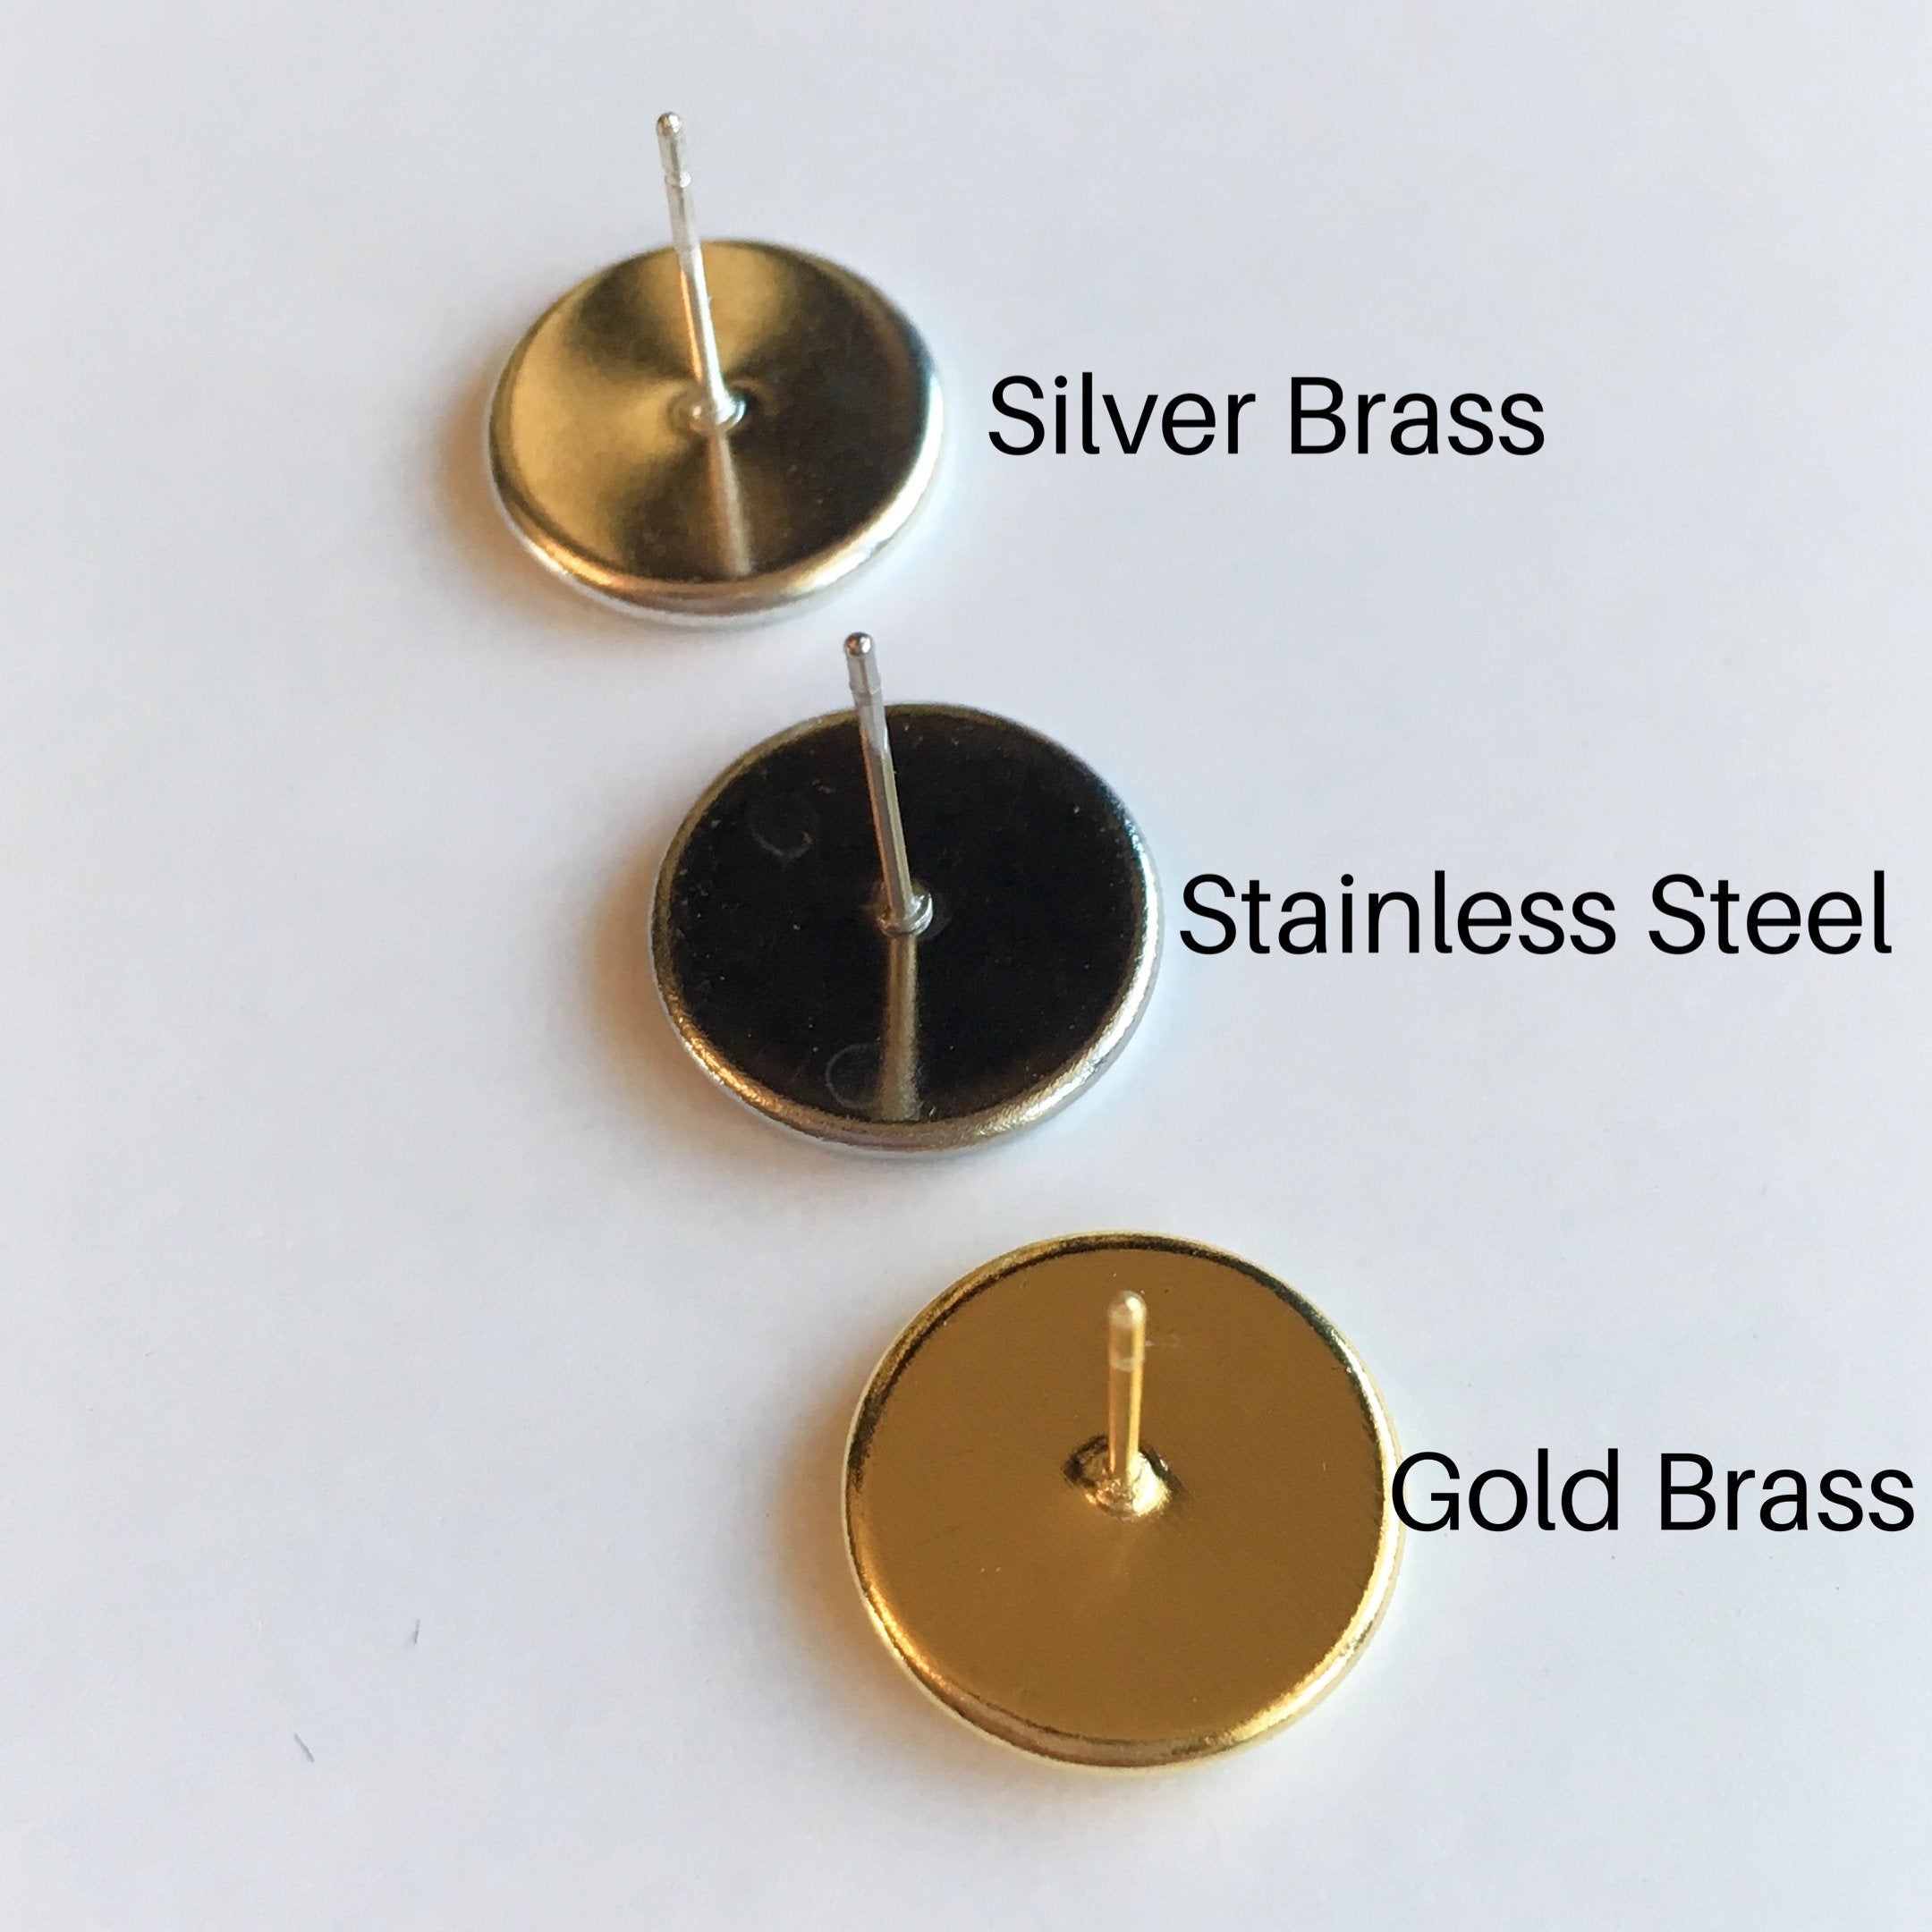 Setting comparisons of Silver brass, stainless steel, and gold brass